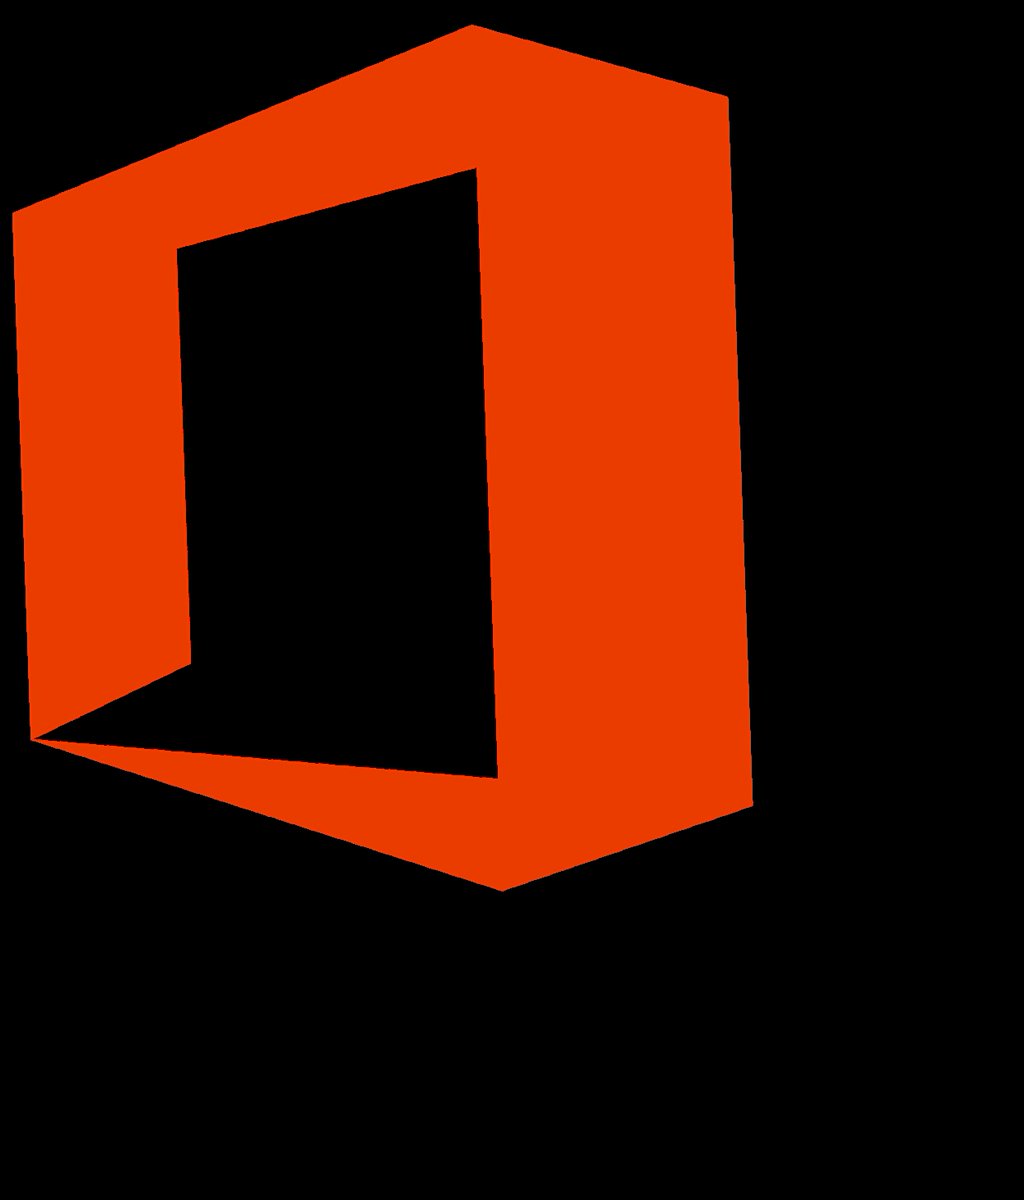 microsoft-office-free-download-full-version-cnet-twitter